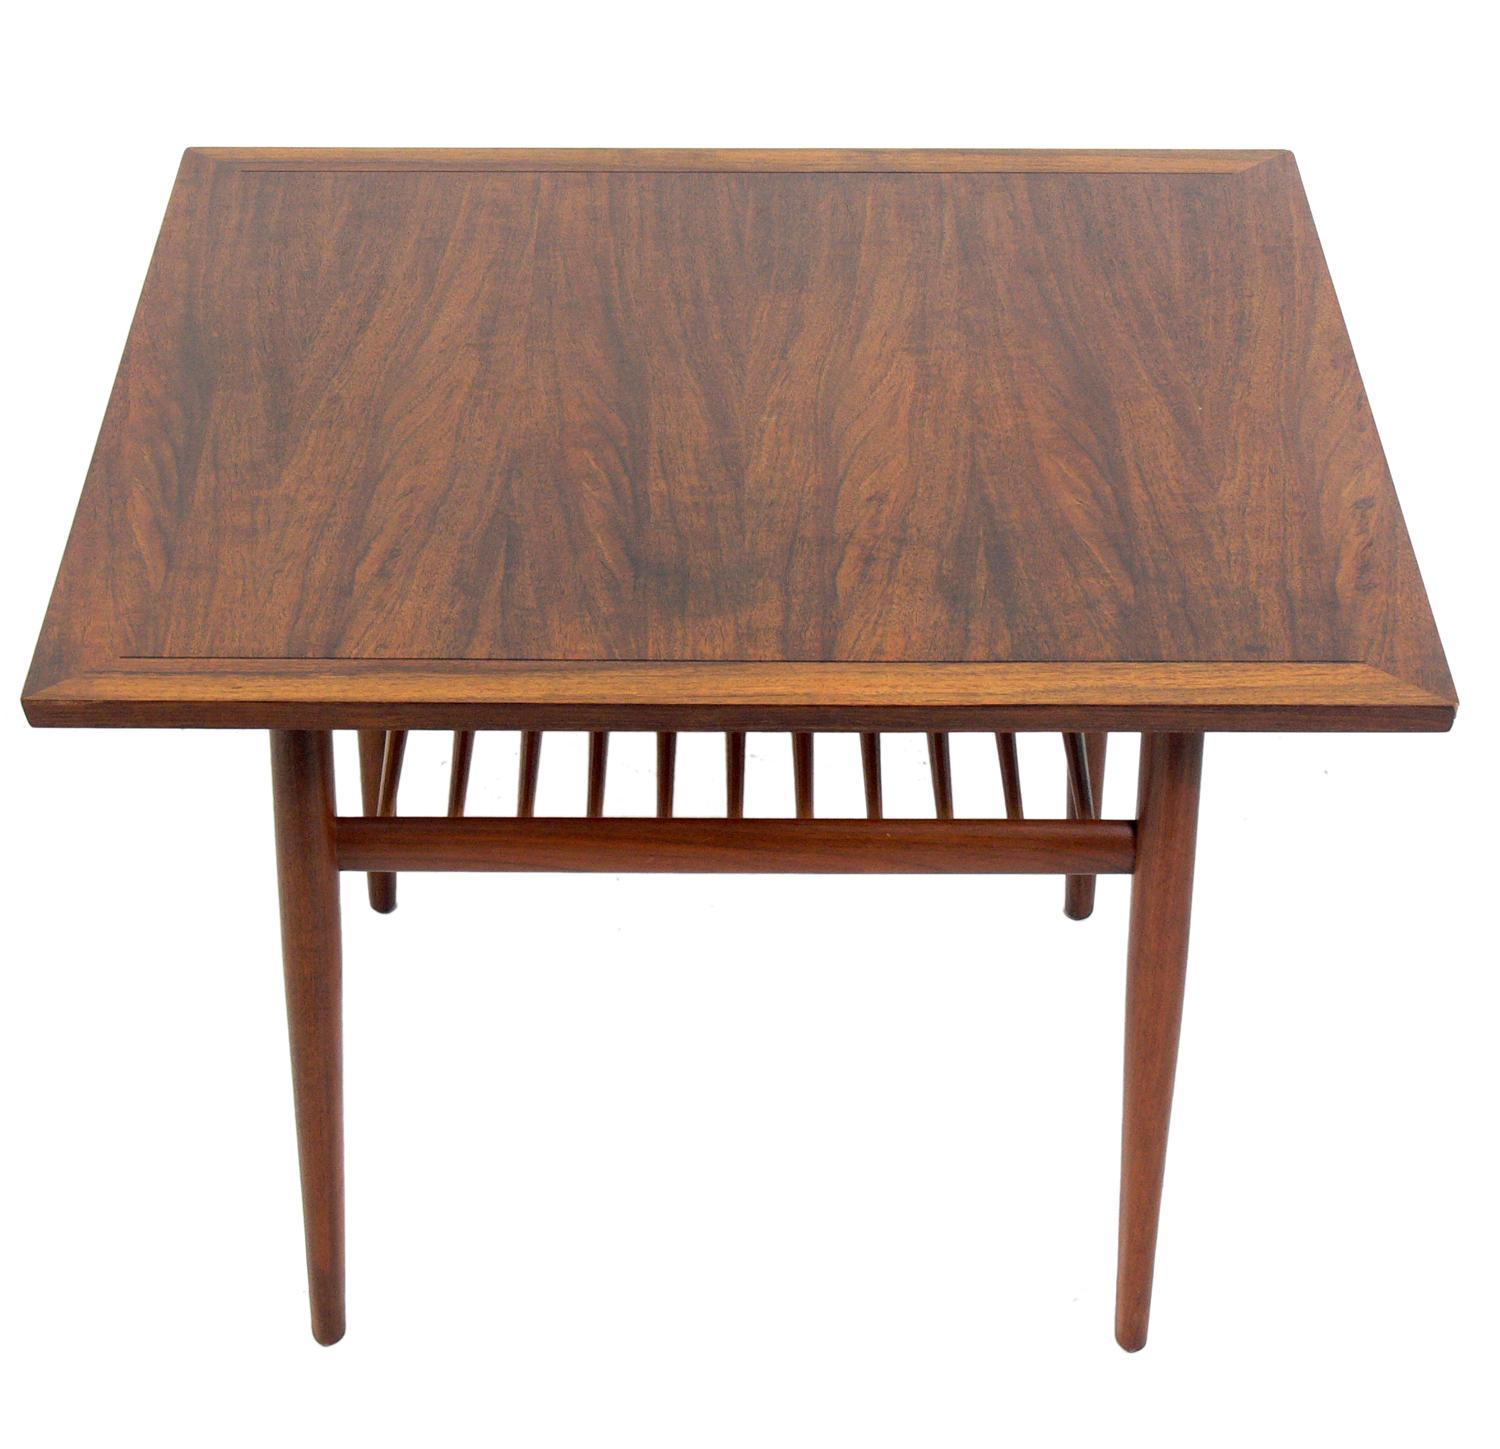 Clean lined walnut table, designed by George Nakashima for Widdicomb, American, circa 1960s. This piece is a versatile size and can be used as a side or end table, or as a nightstand or drinks table between two chairs.